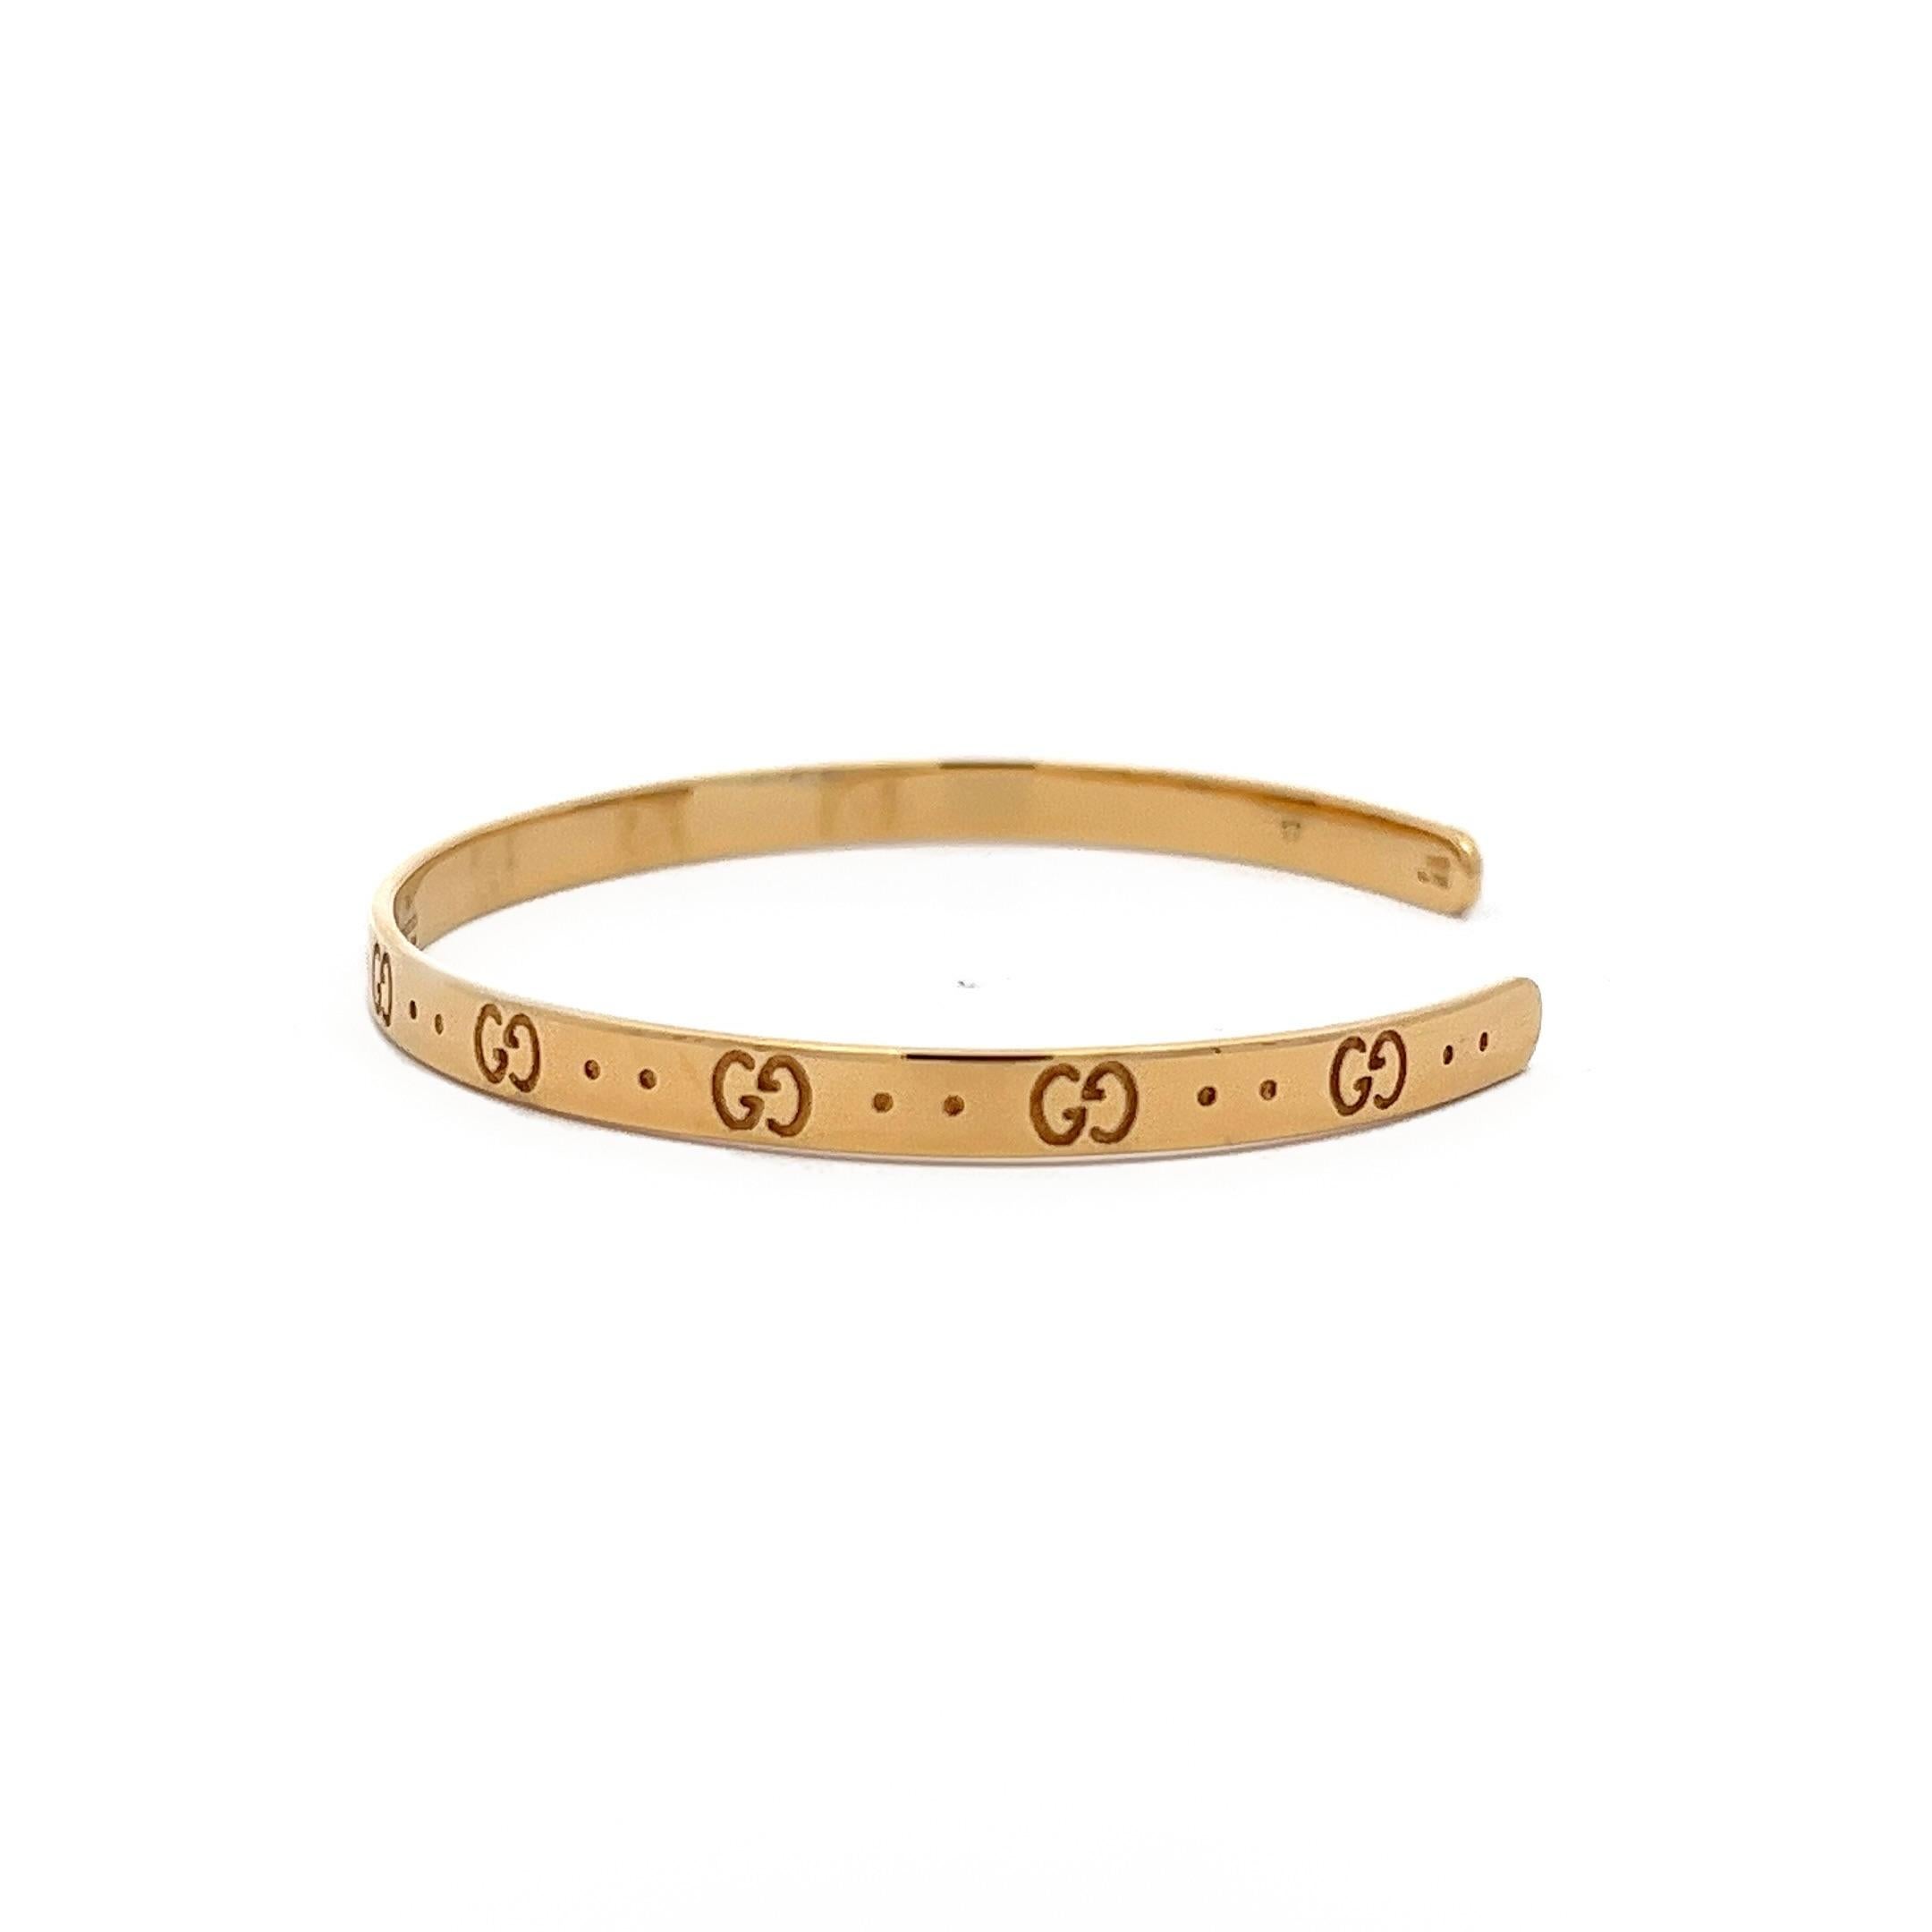 Introducing the Gucci Cuff Bracelet. Made of 18 karat yellow gold, this piece is designed with a series of interlocking G motifs, and is recognized as one of the iconic creations from Gucci. Its classic style and signature detailing underscore the